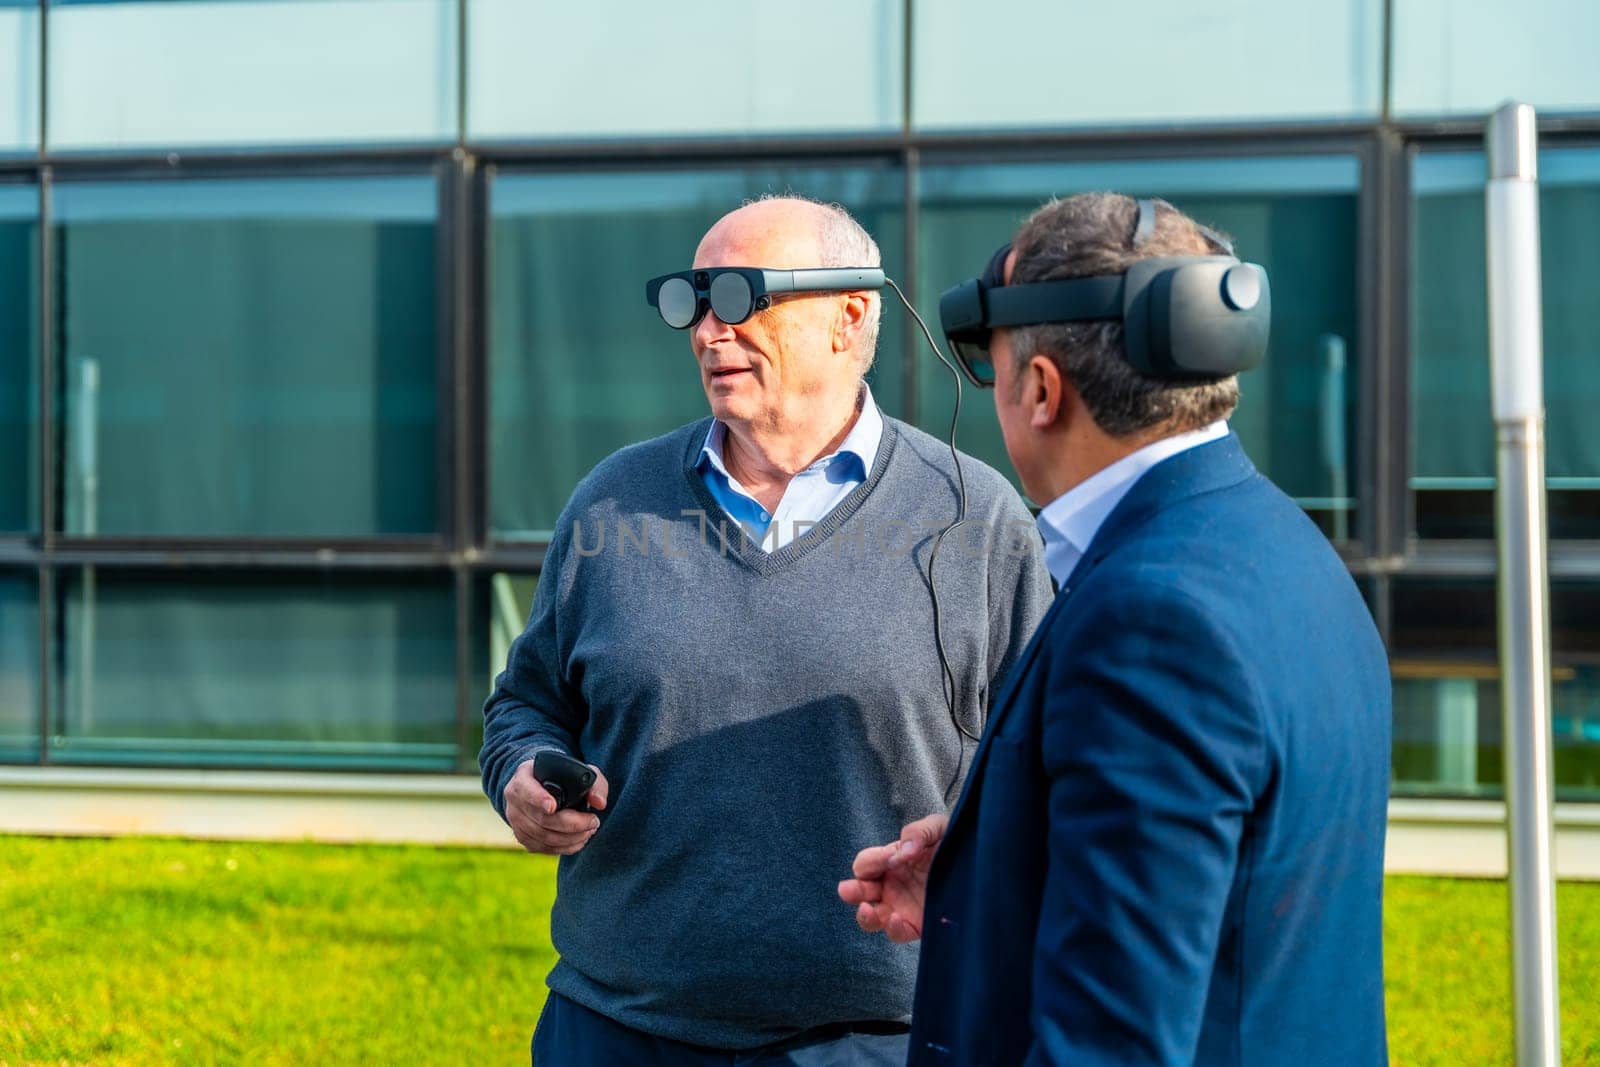 Aged businessmen testing virtual reality headset outdoors by Huizi